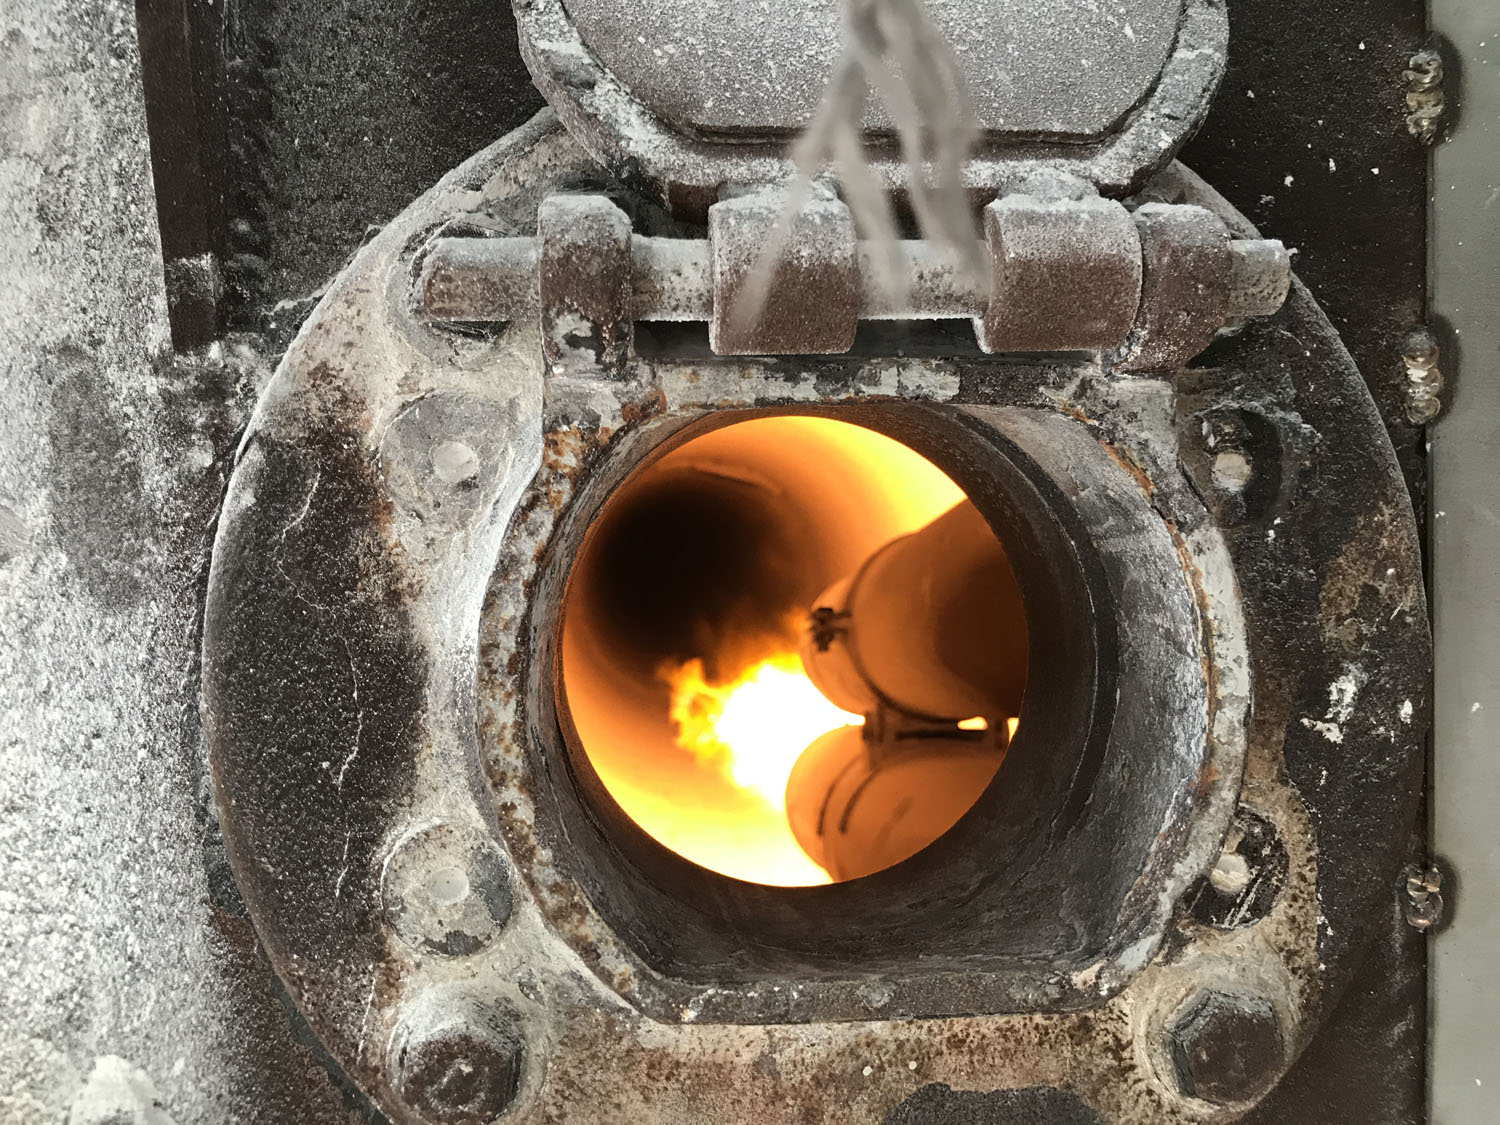 METSO ACQUISISCE KILN FLAMES SYSTEMS - Perforare -  - Aziende News